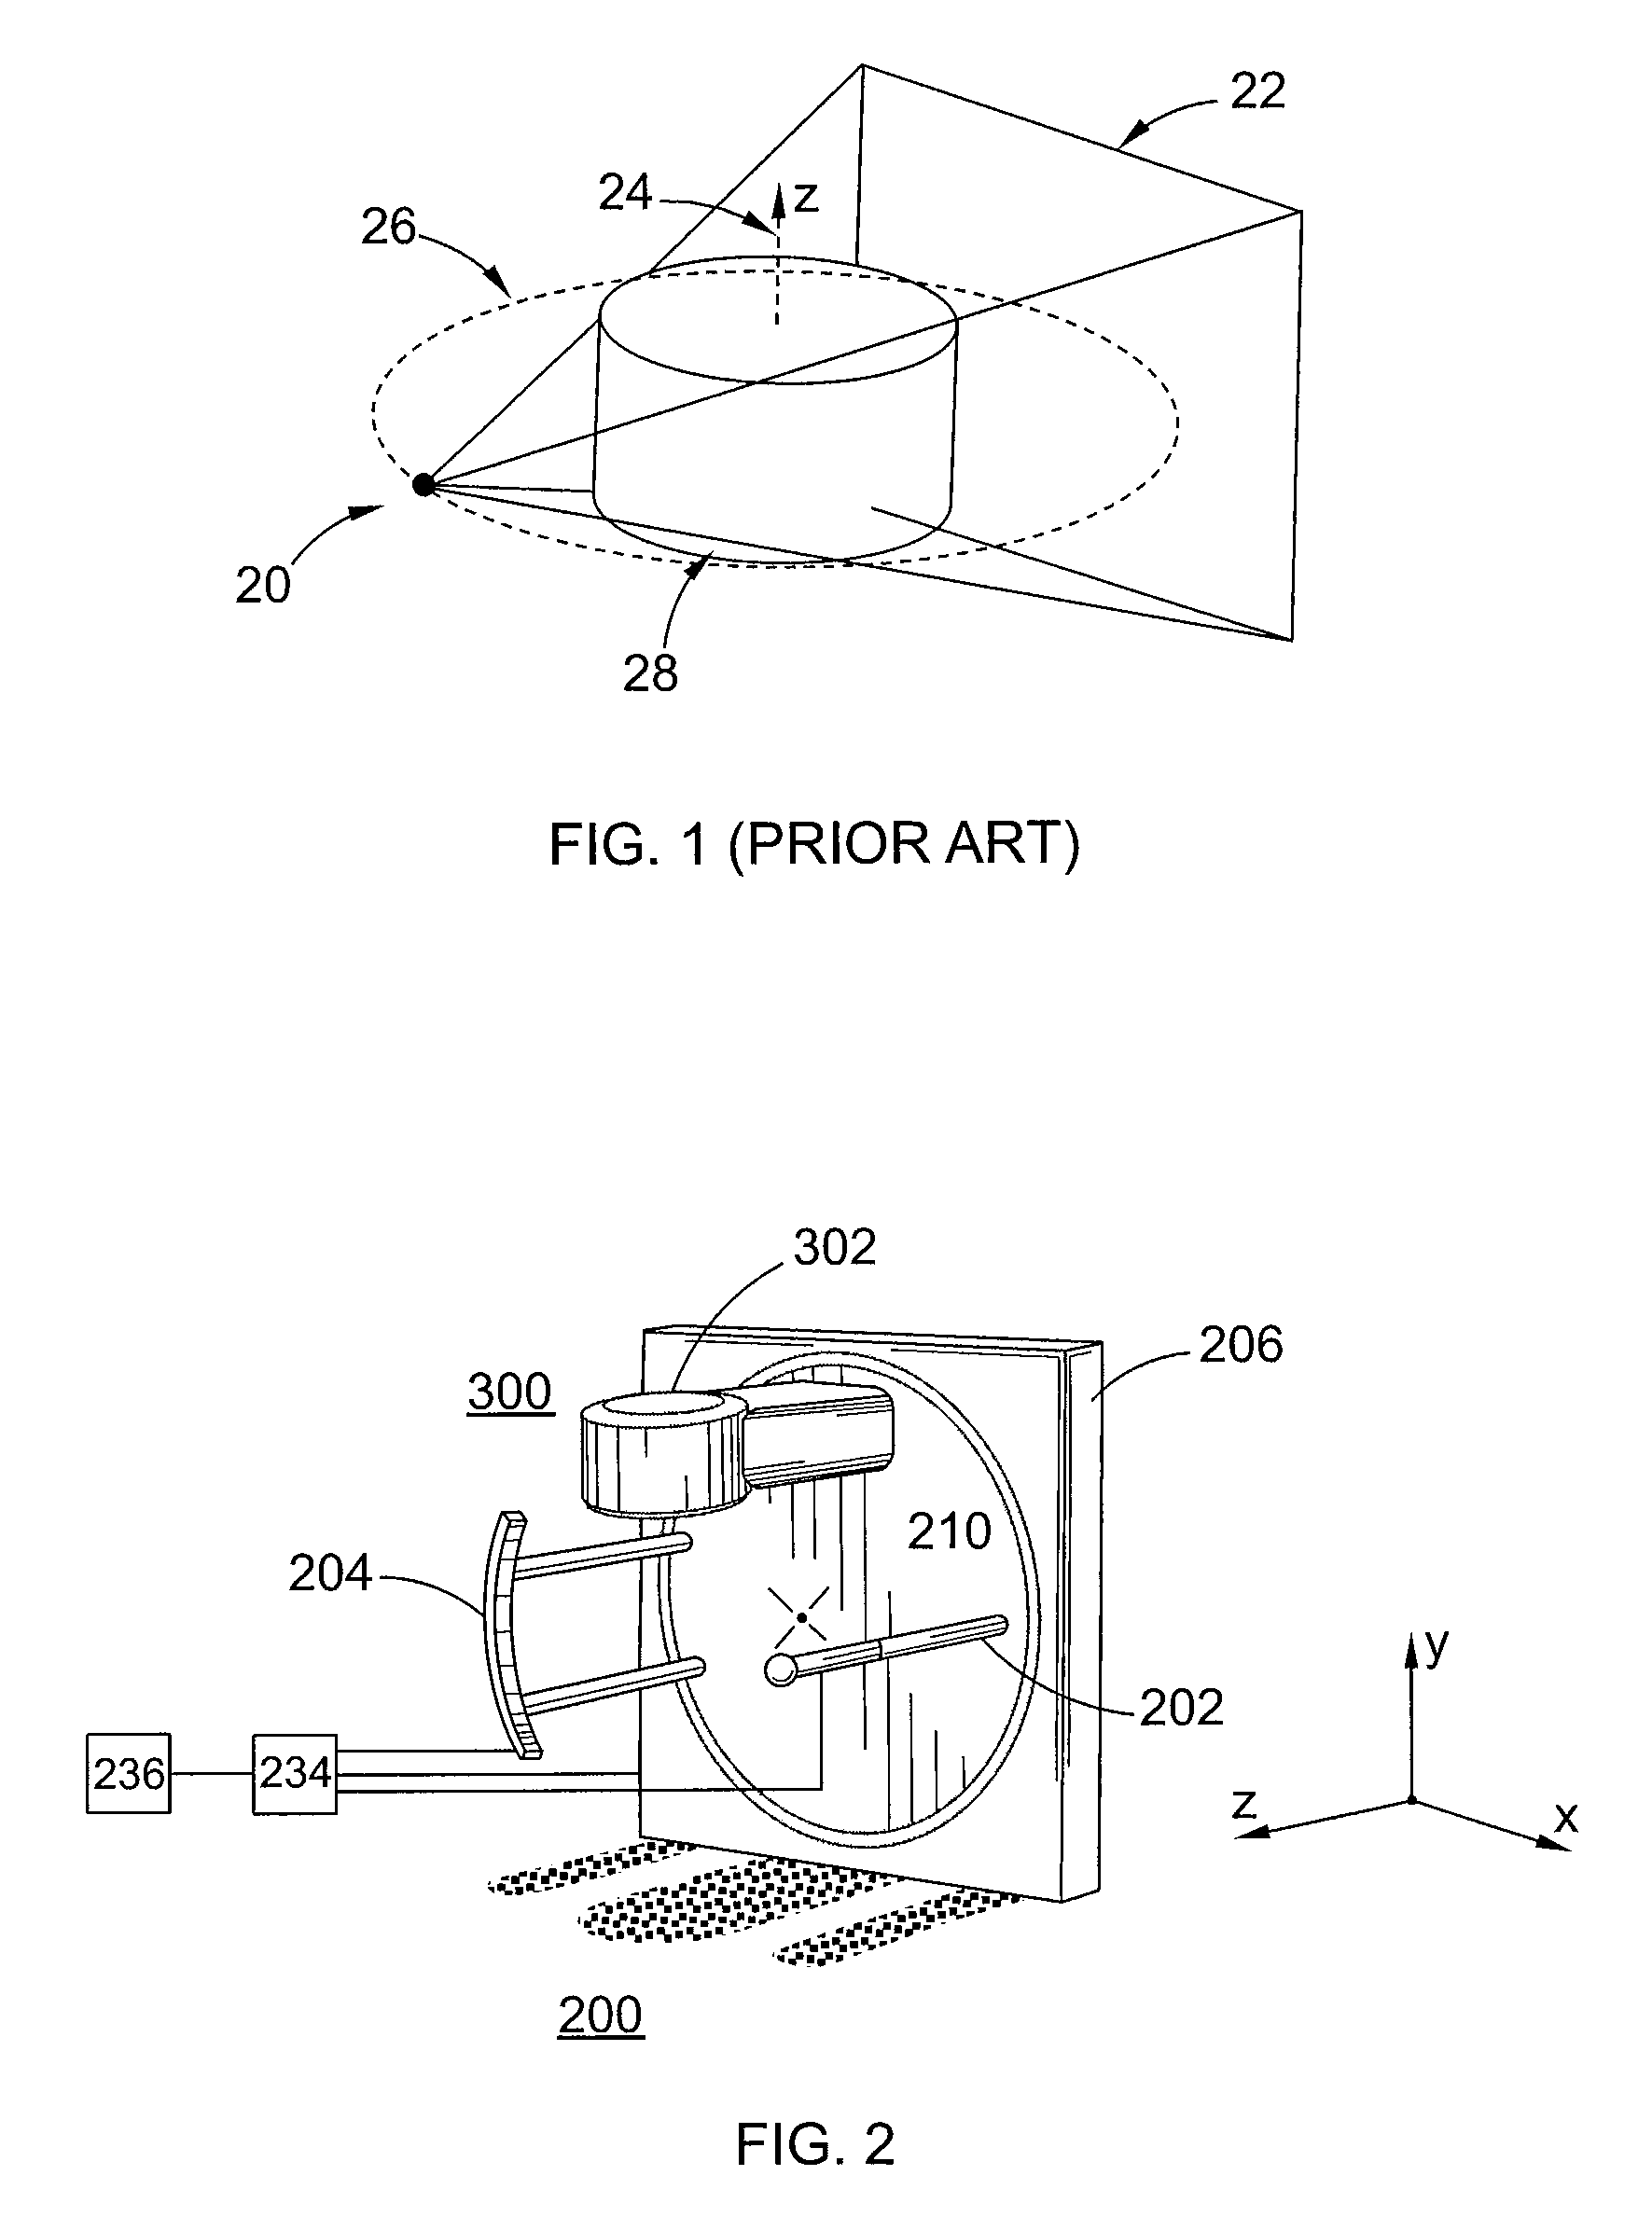 Tetrahedron beam computed tomography with multiple detectors and/or source arrays